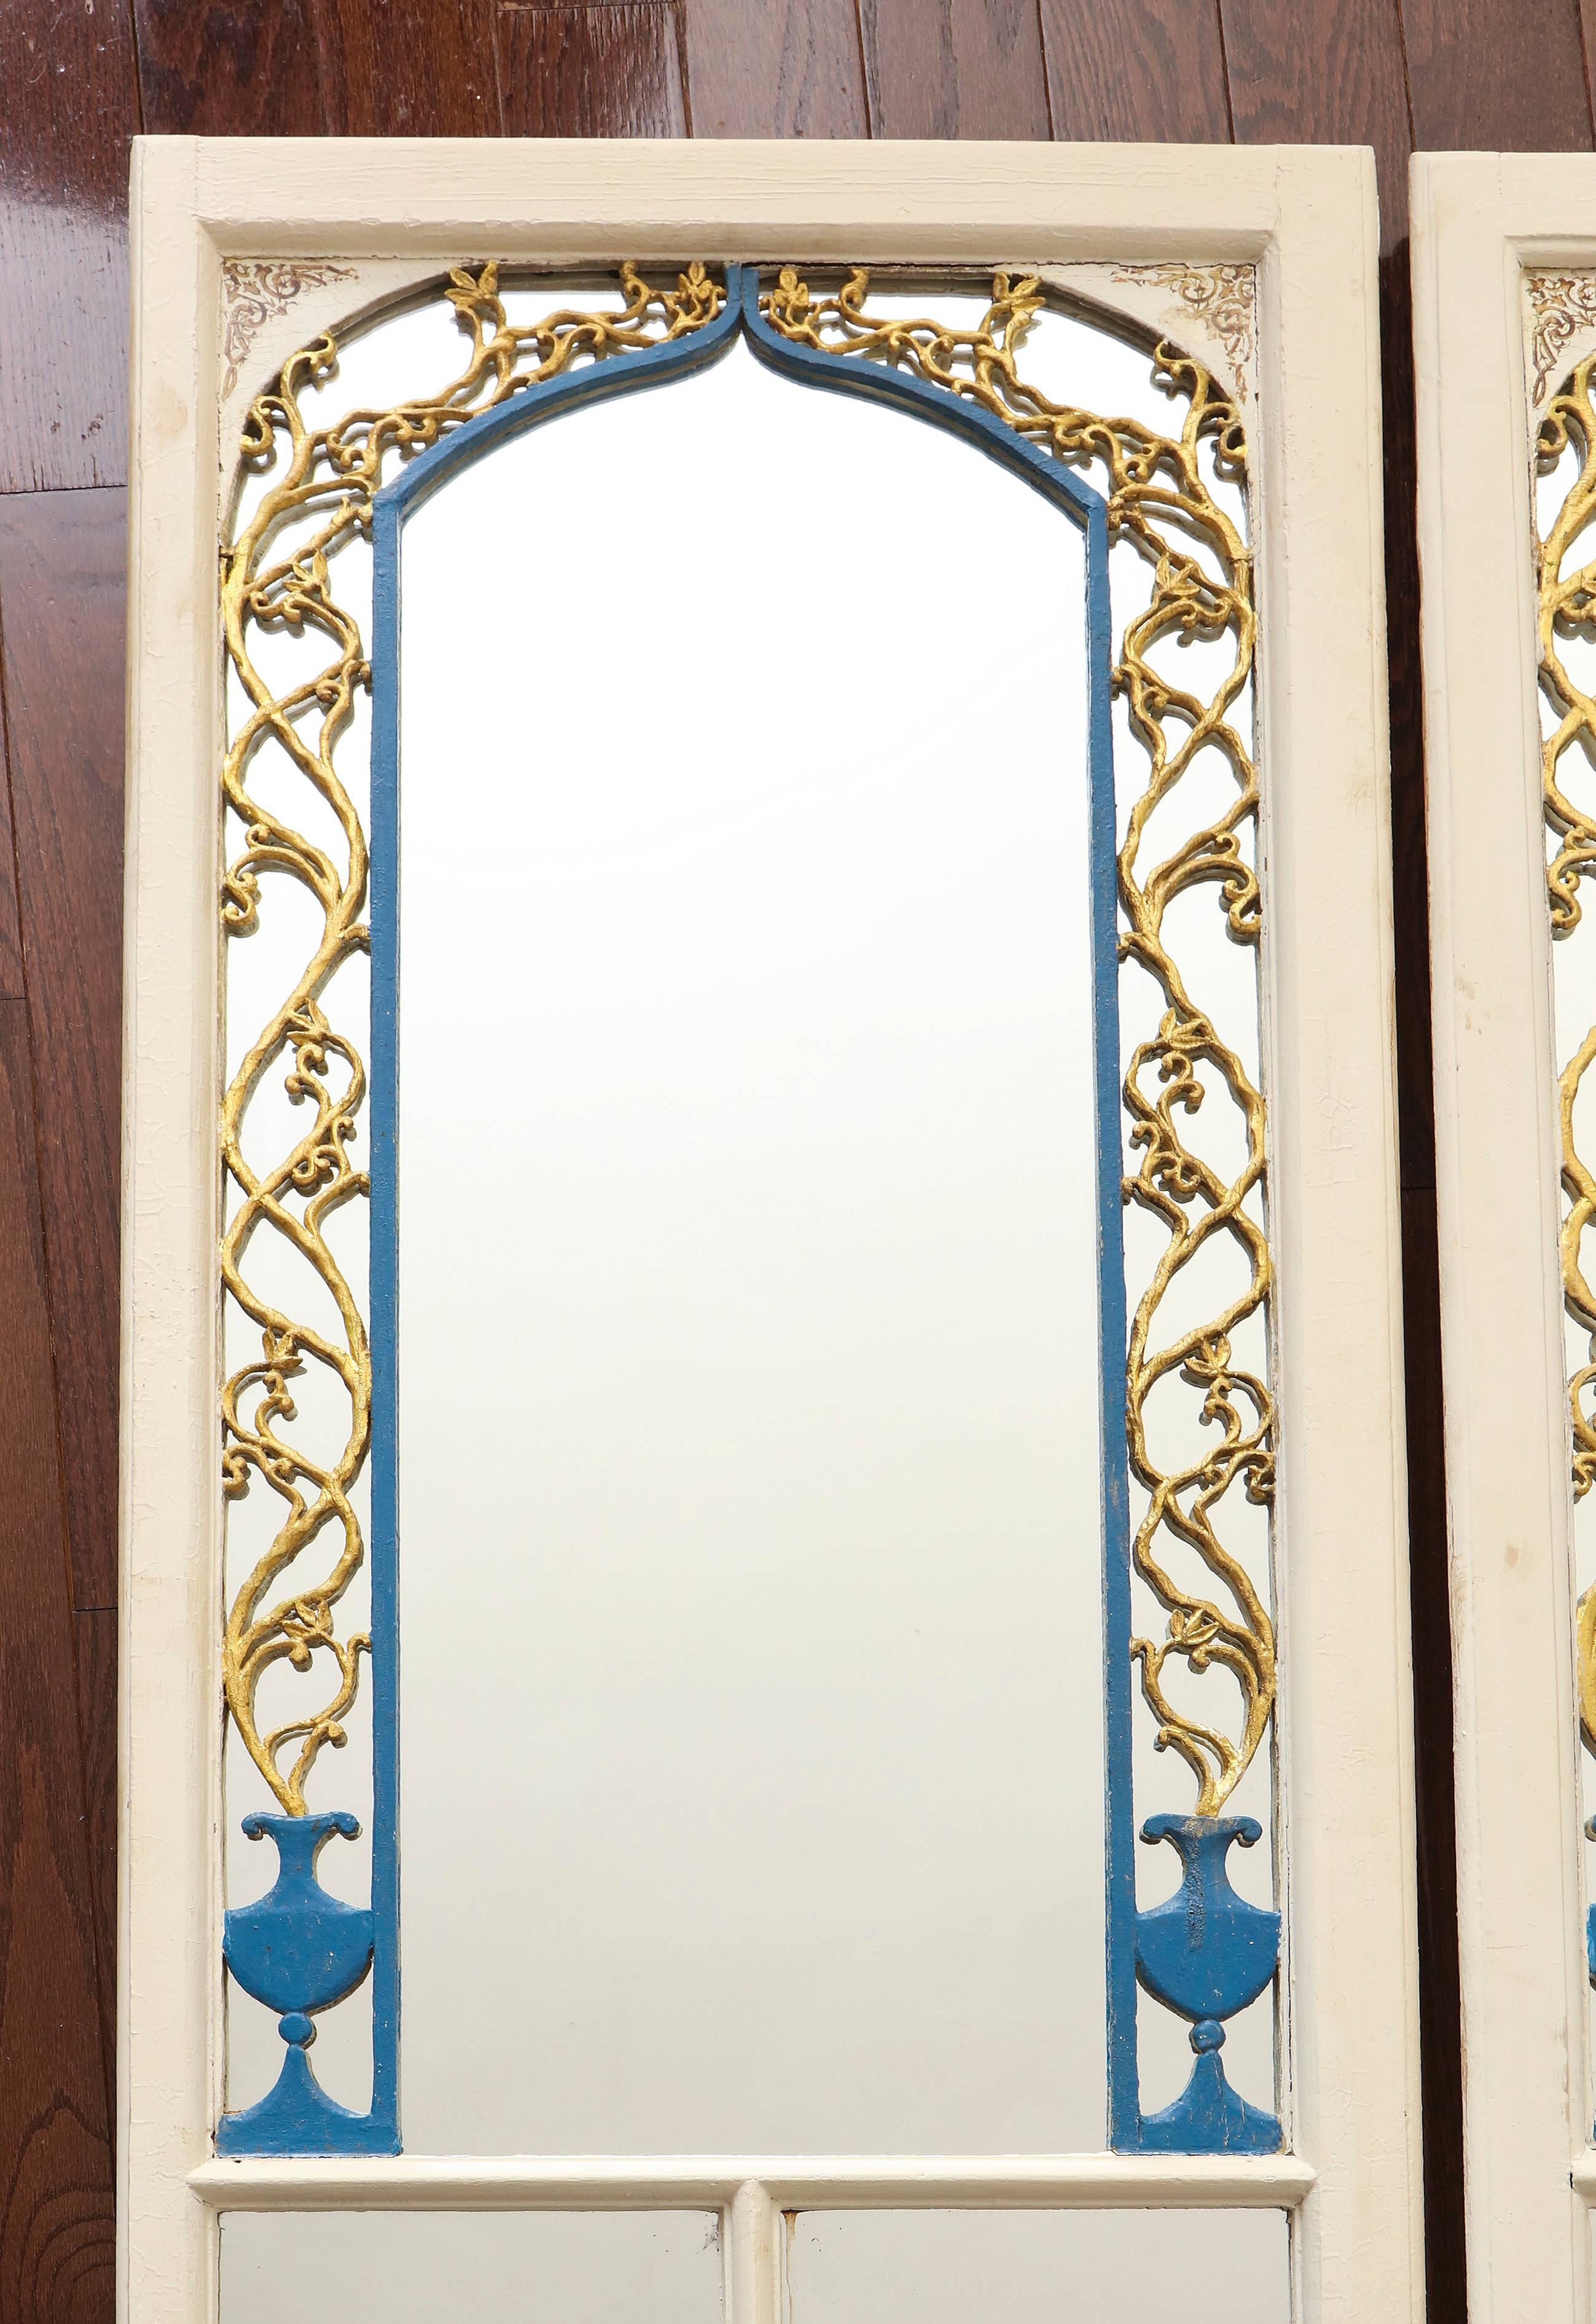 A pair of carved, gilt and painted blue and white Portuguese wood cabinet doors mounted as pier mirrors, circa 1800, with carved arch, cups and coral ornamentation.
 